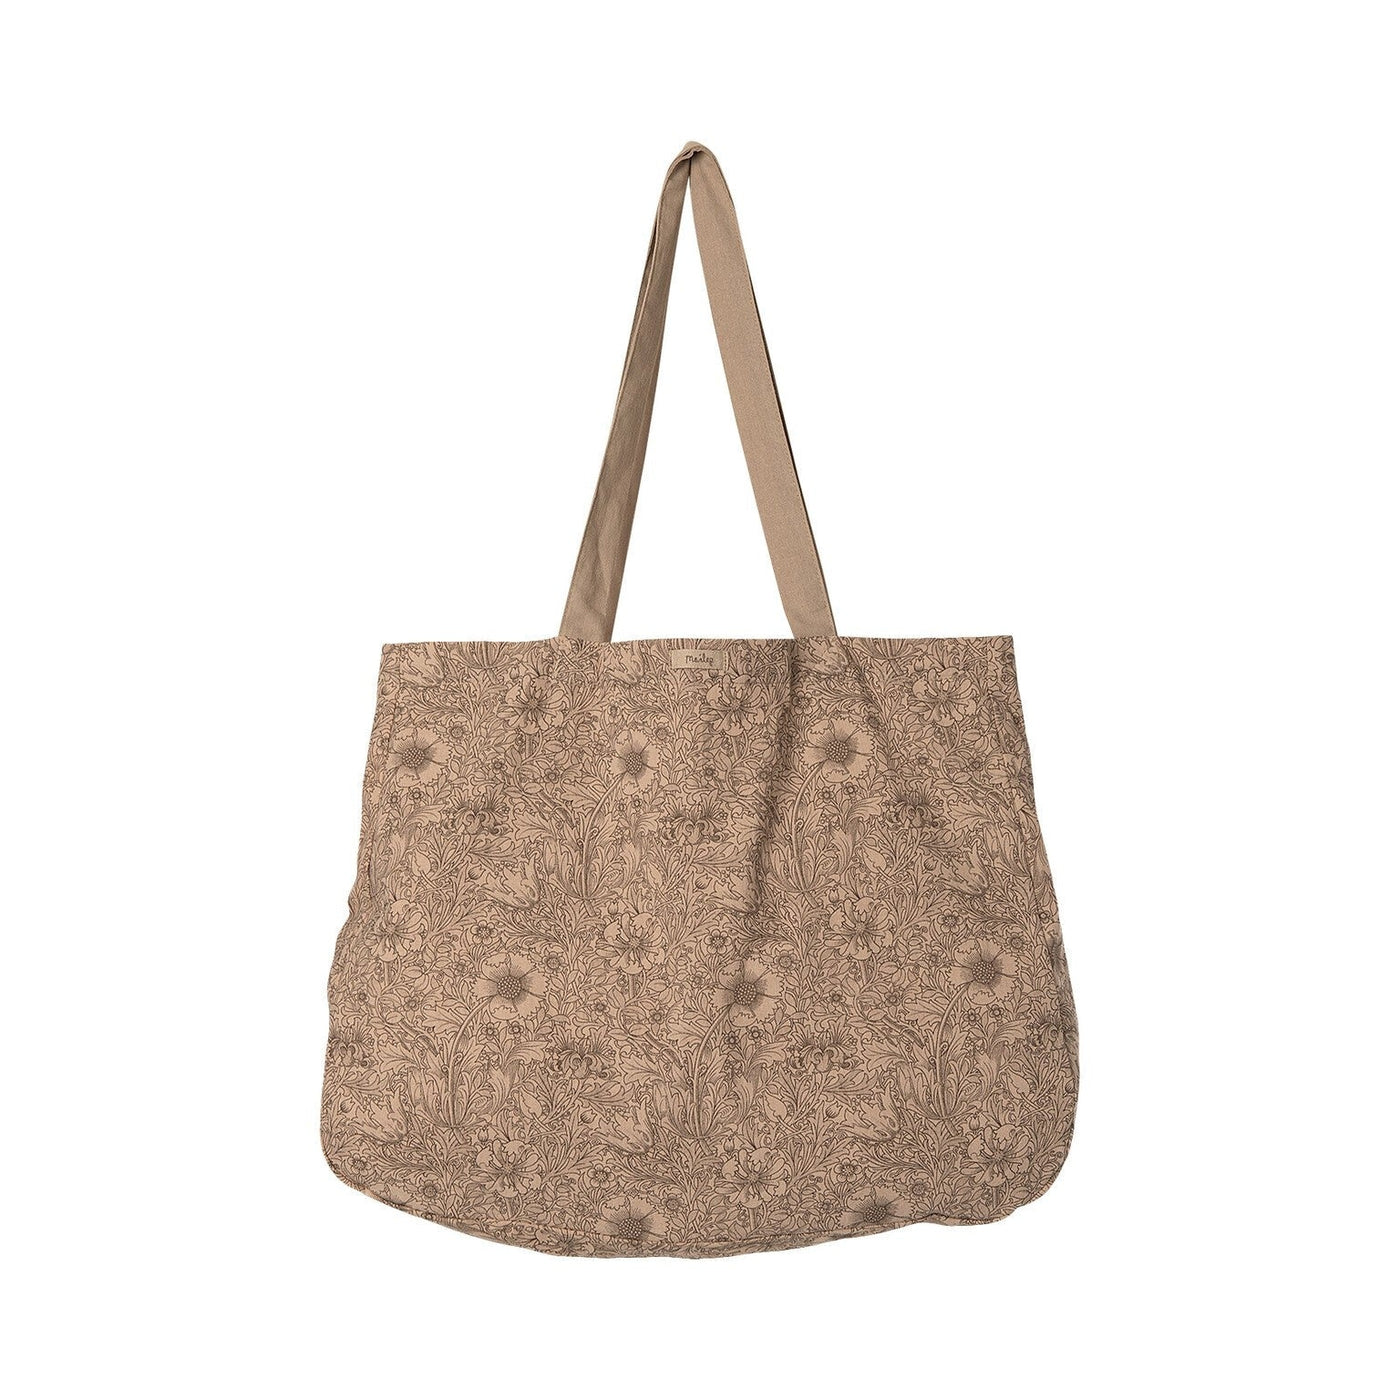 Adult's Small Tote Bag - Flowers